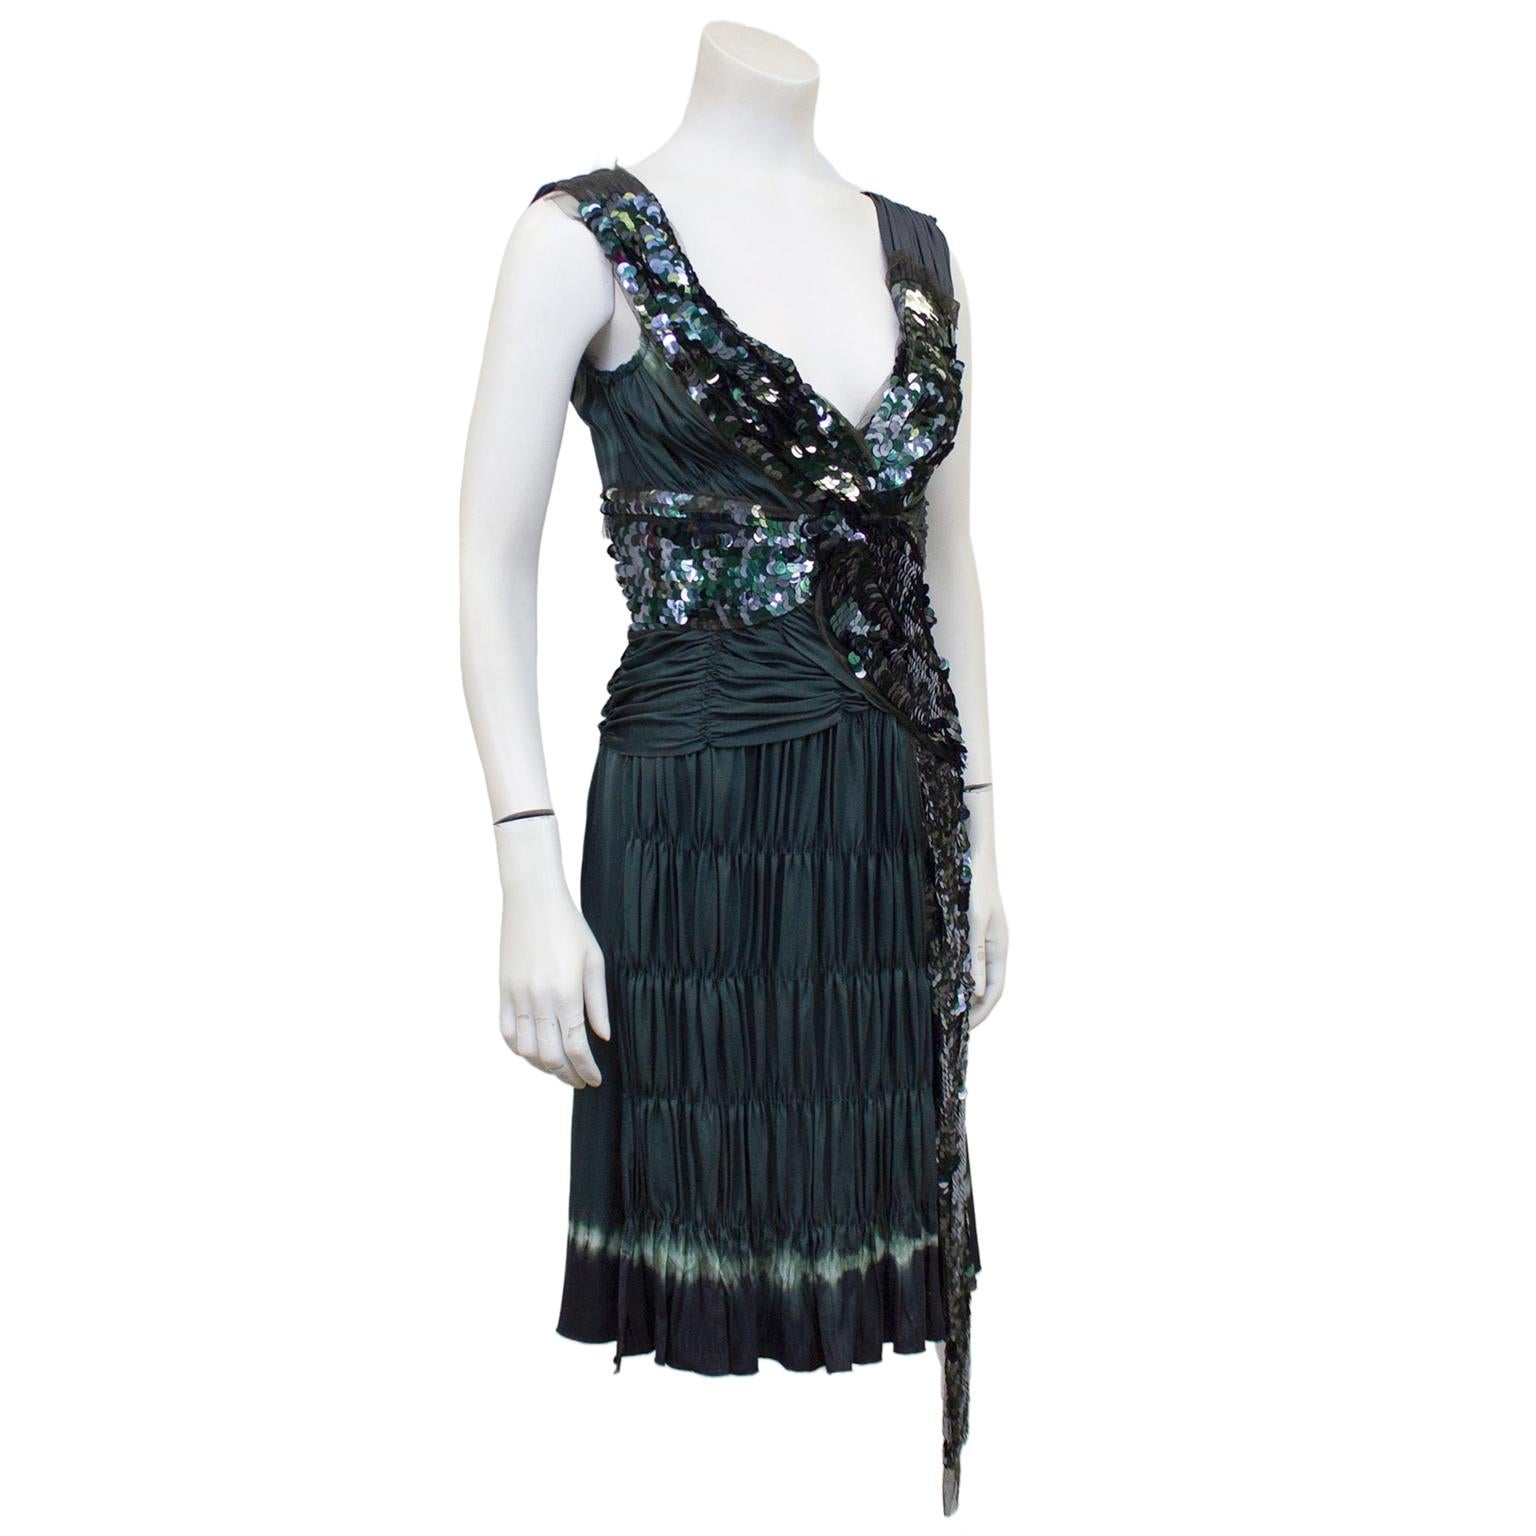 Stunning early 2000's Prada olive/grey cocktail dress. The dress is v neck with a fitted bodice featuring large teal sequins throughout, with ruching and netting details. Straps are a dark grey/silver and ruched at the shoulder seam. Dress is drop